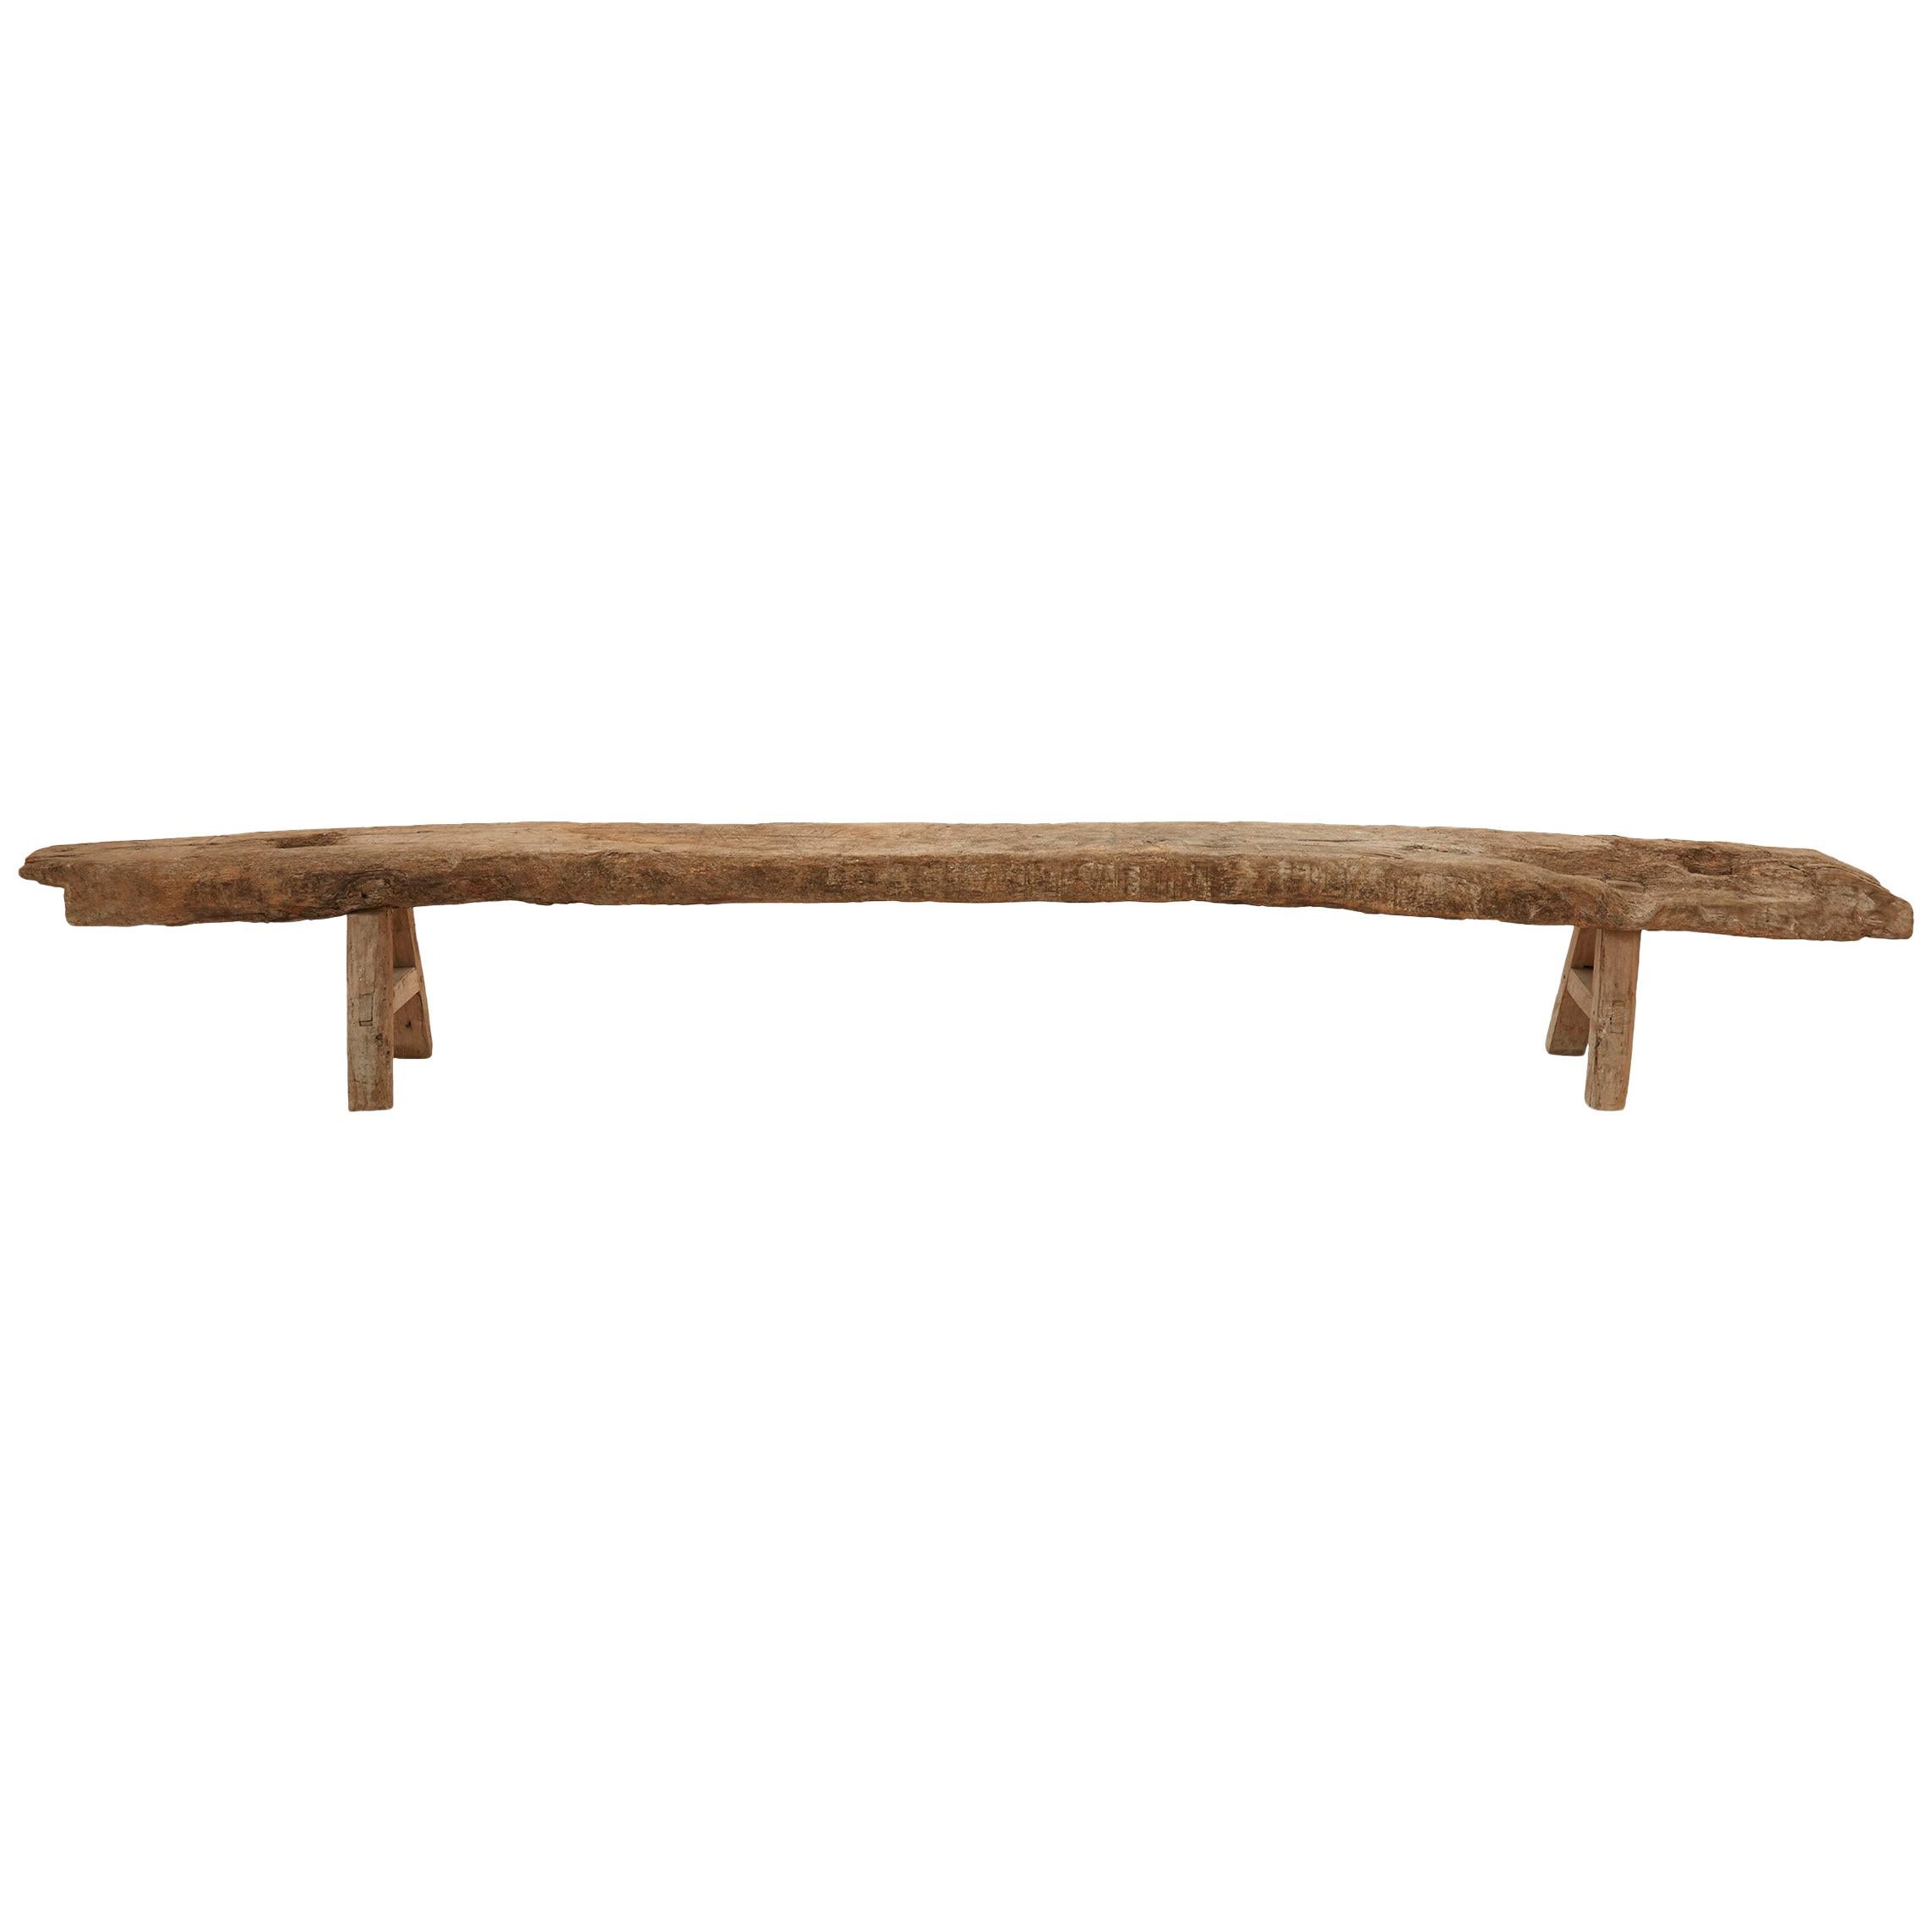 19th Century Rustic Hand Hewn Wood Bench